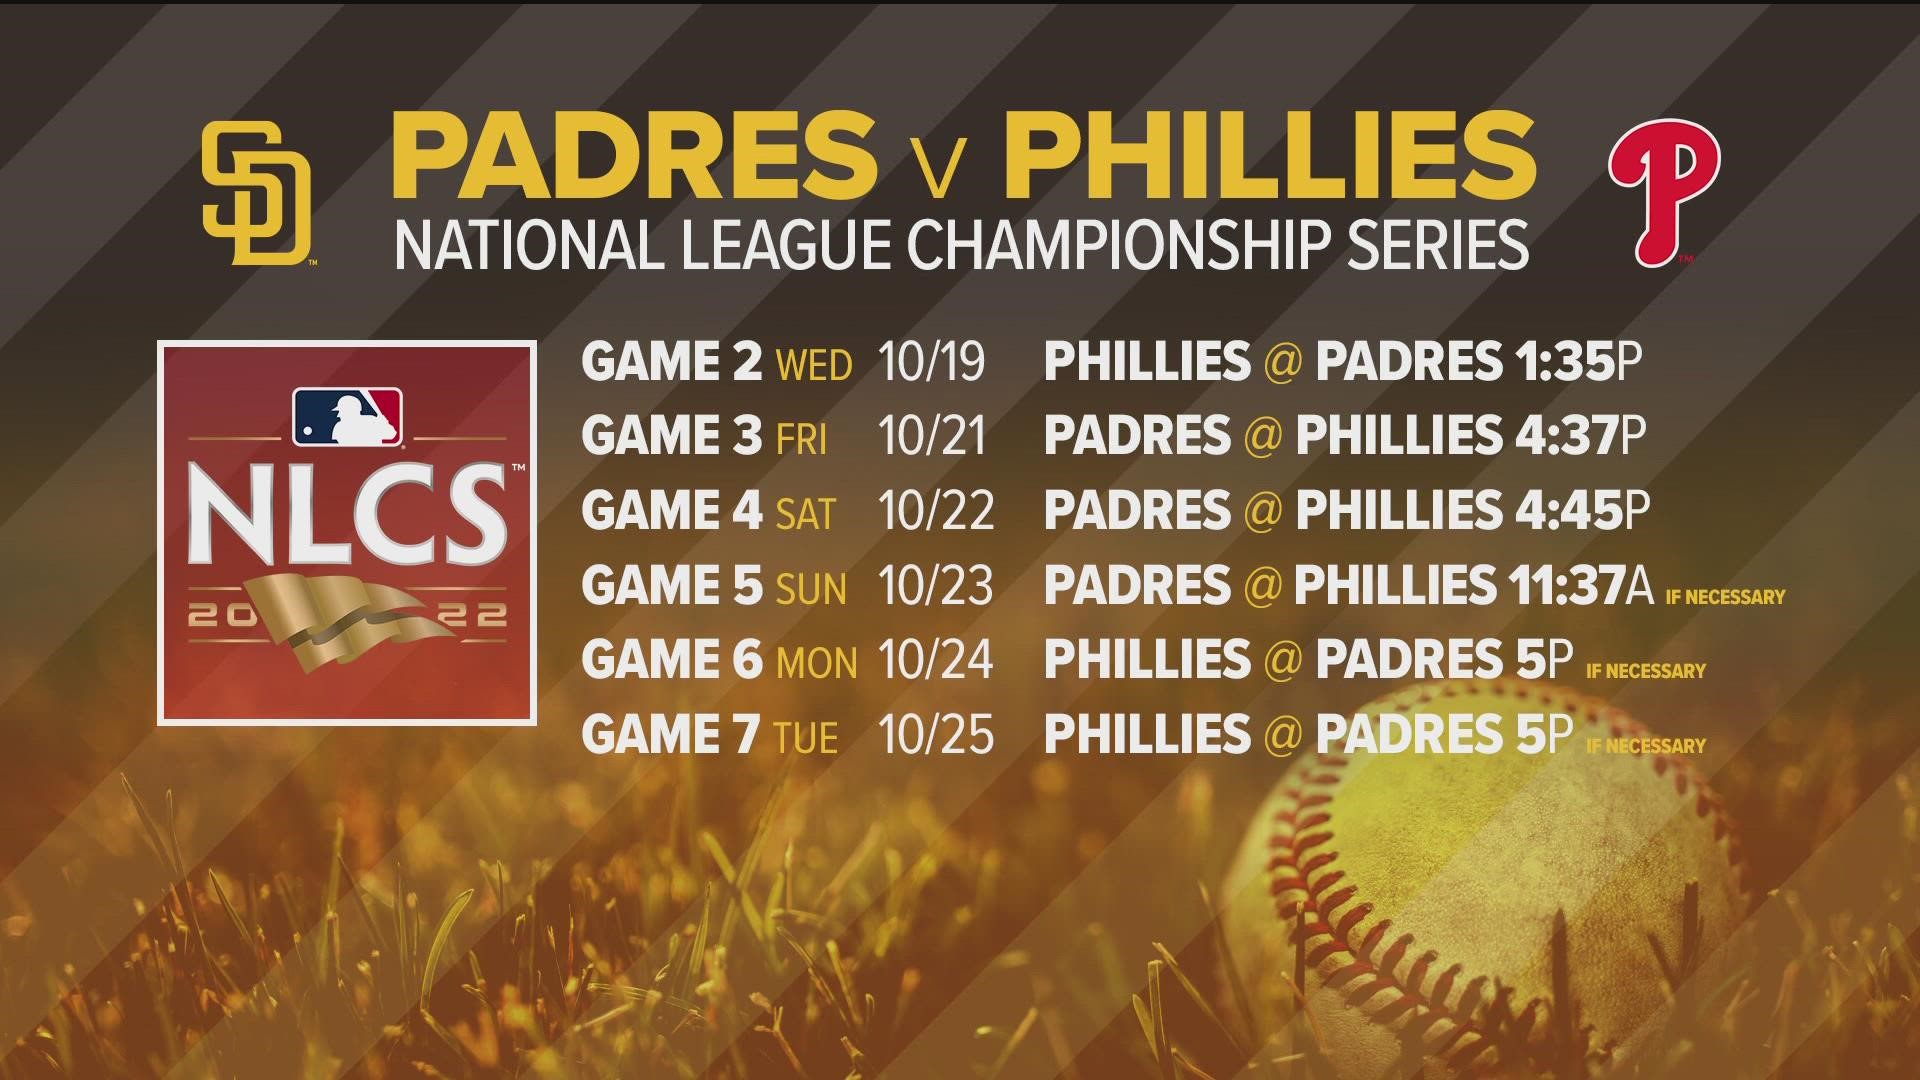 San Diego Padres drop NLCS Game 1, losing 2-0 to the Philadelphia